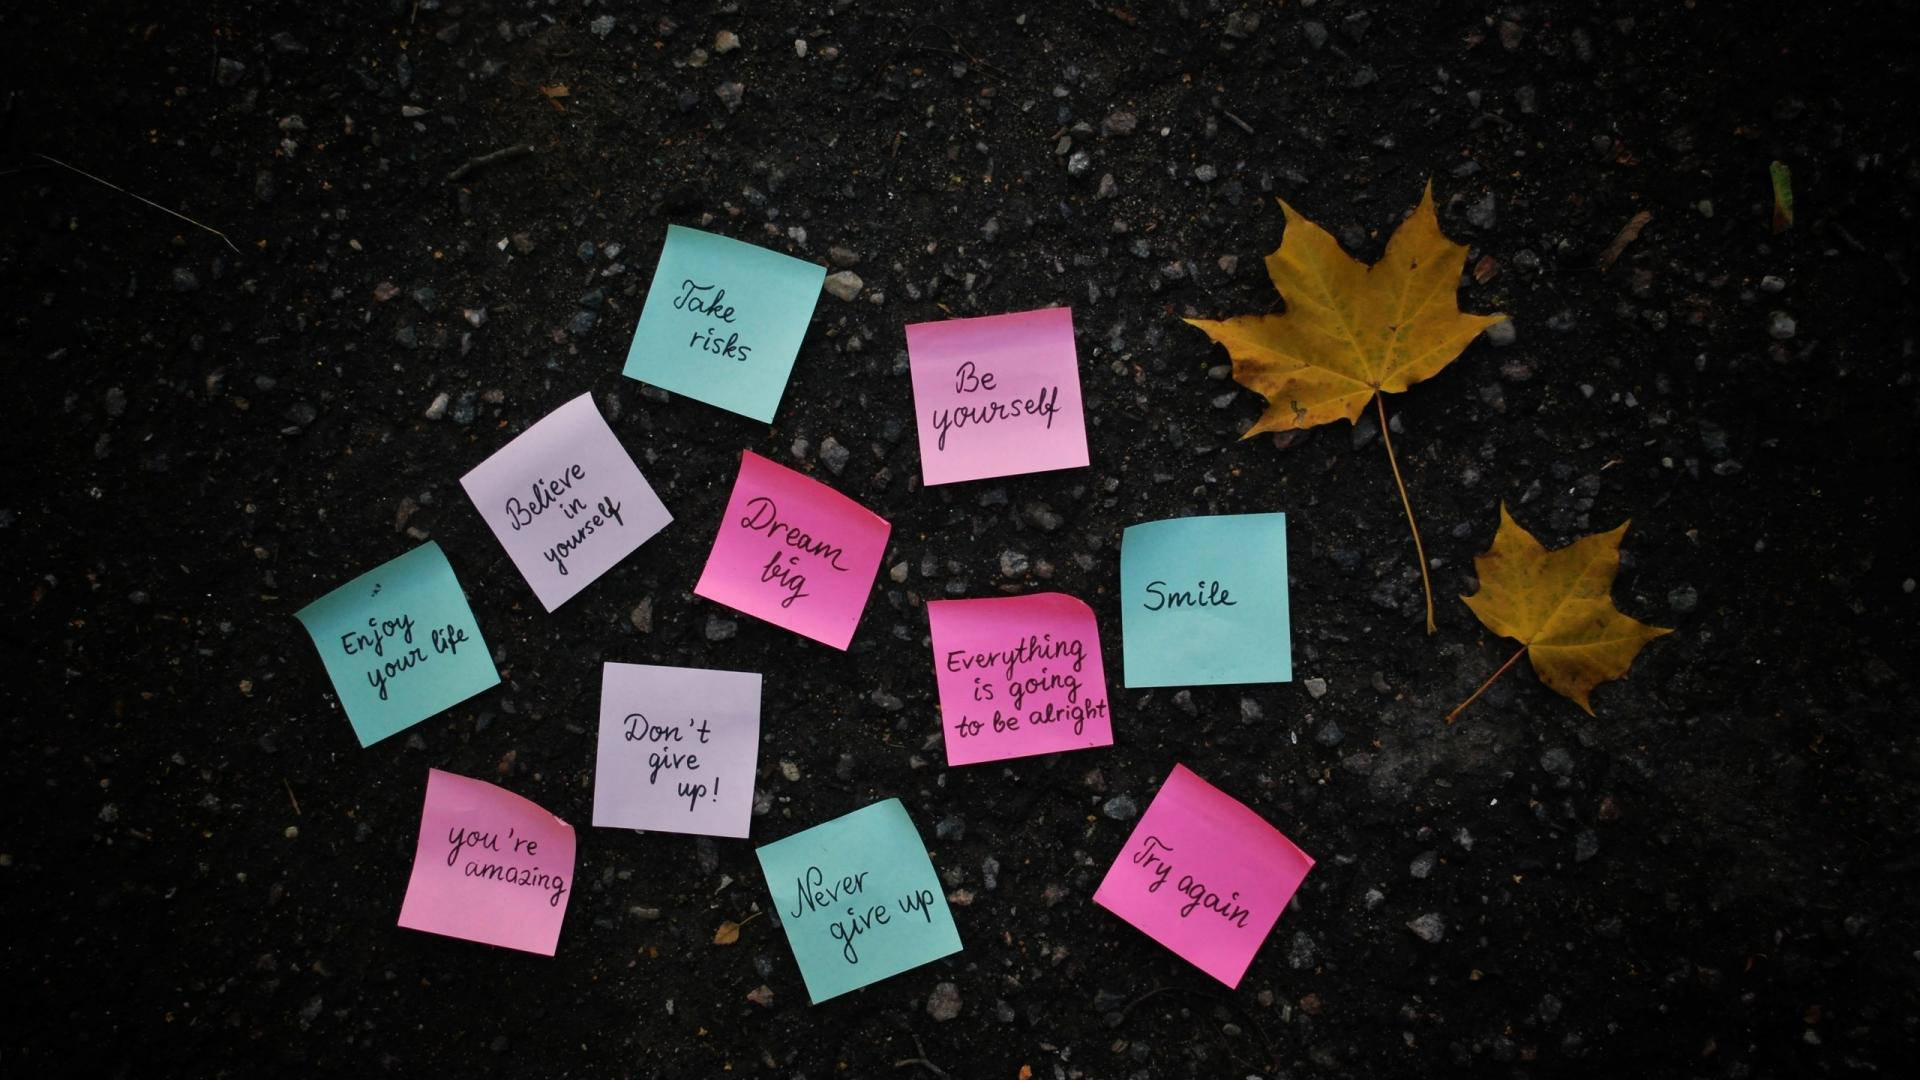 Inspiring Life Quotes on Sticky Notes Wallpaper